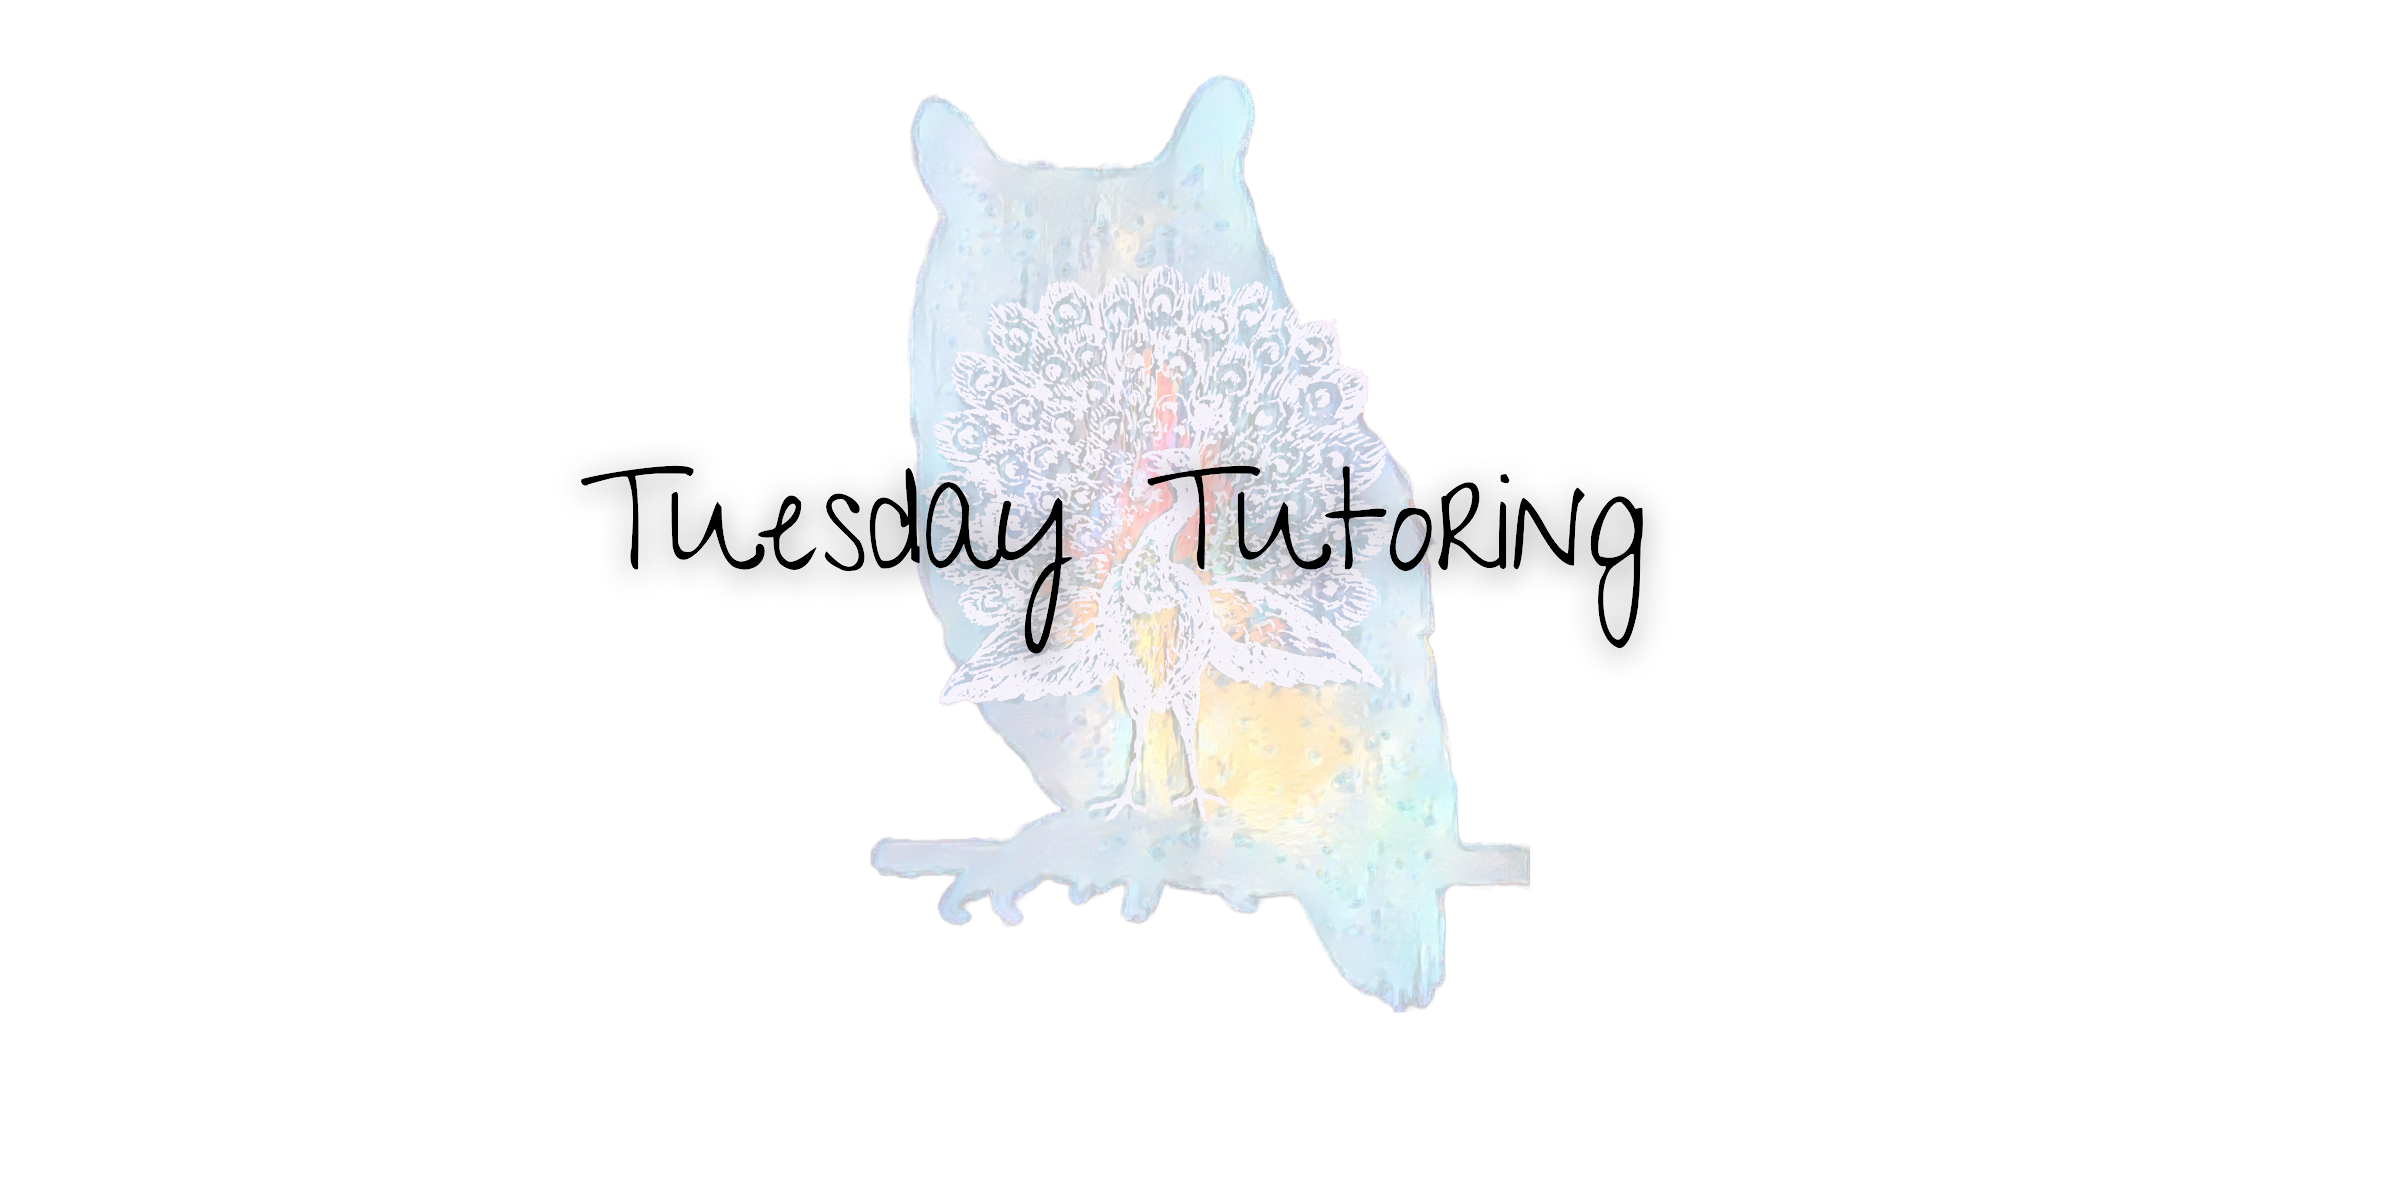 Tuesday Tutoring: The Spiritual Lessons I've Learned by Asking for Help